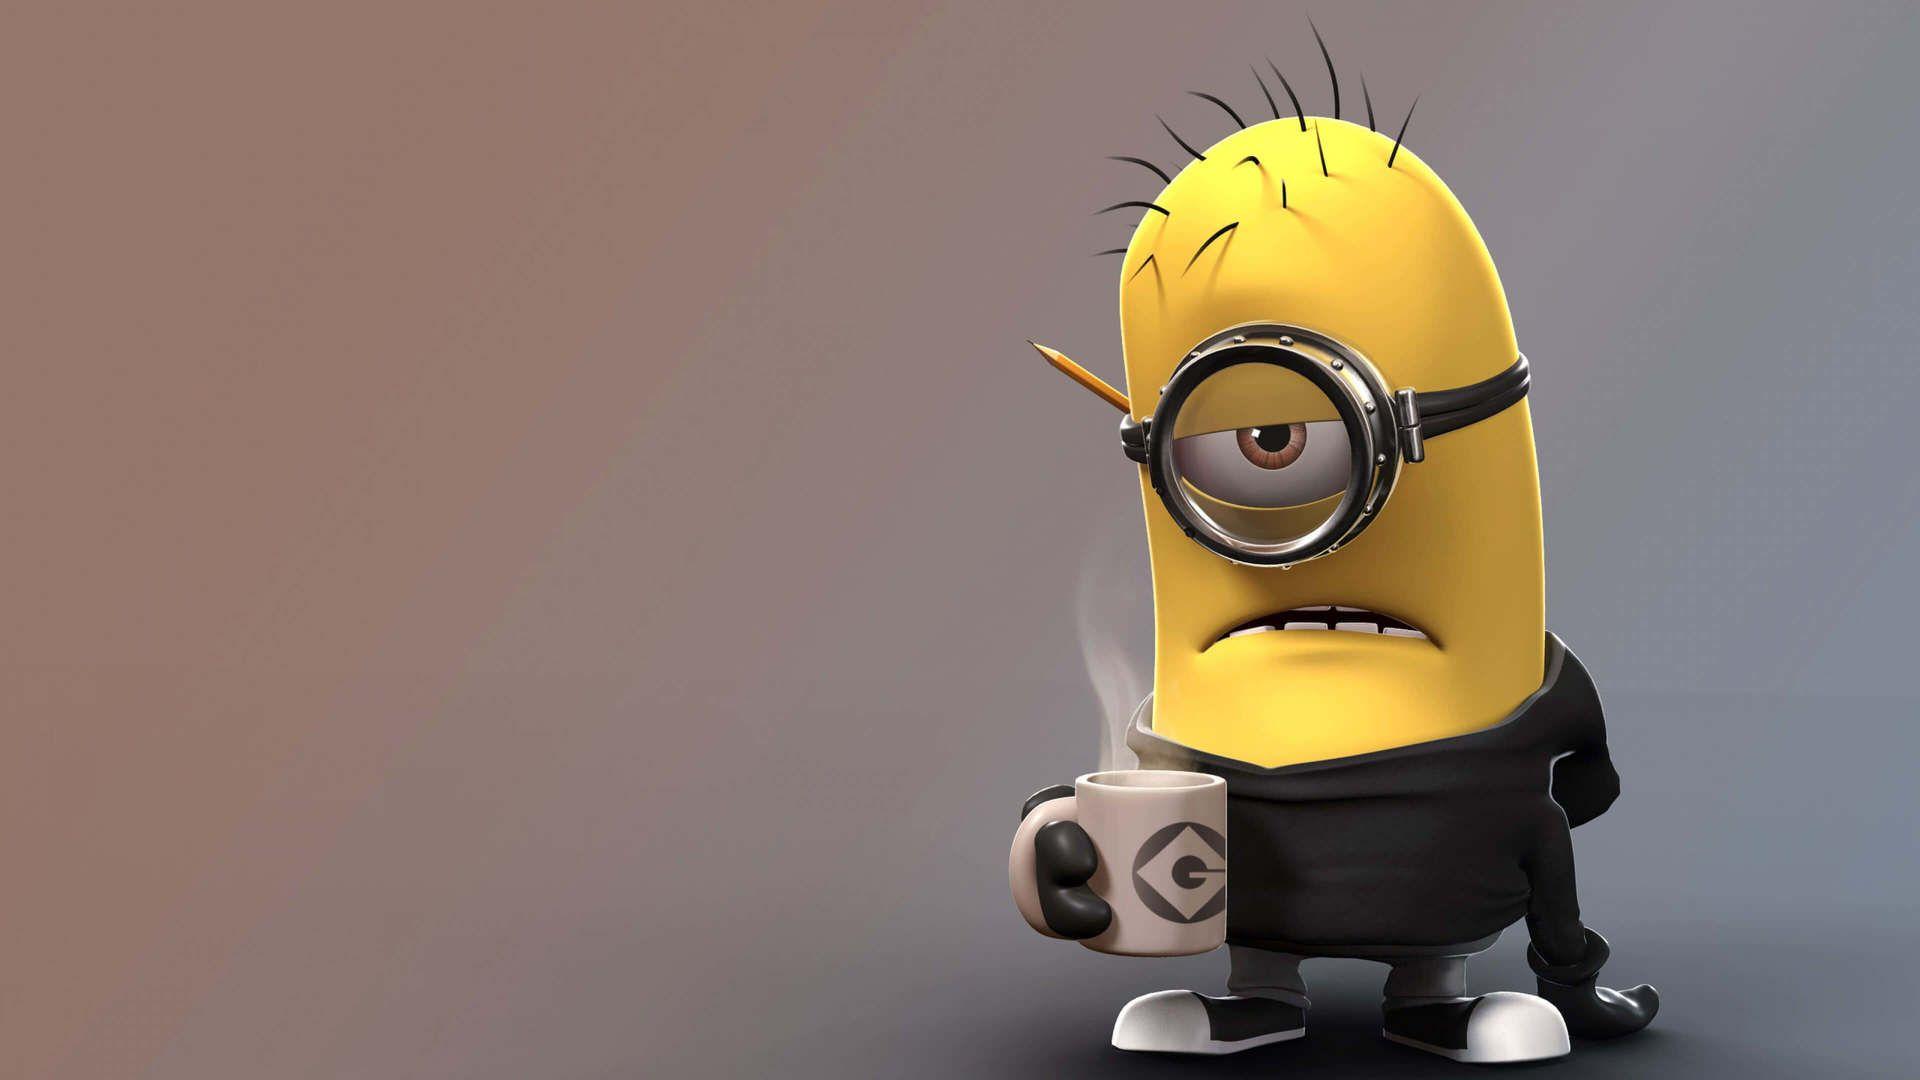 Minions Backgrounds Funny Images For Desktop  Cool Minions HD Wallpaper  For PC Free Download  FancyOdds